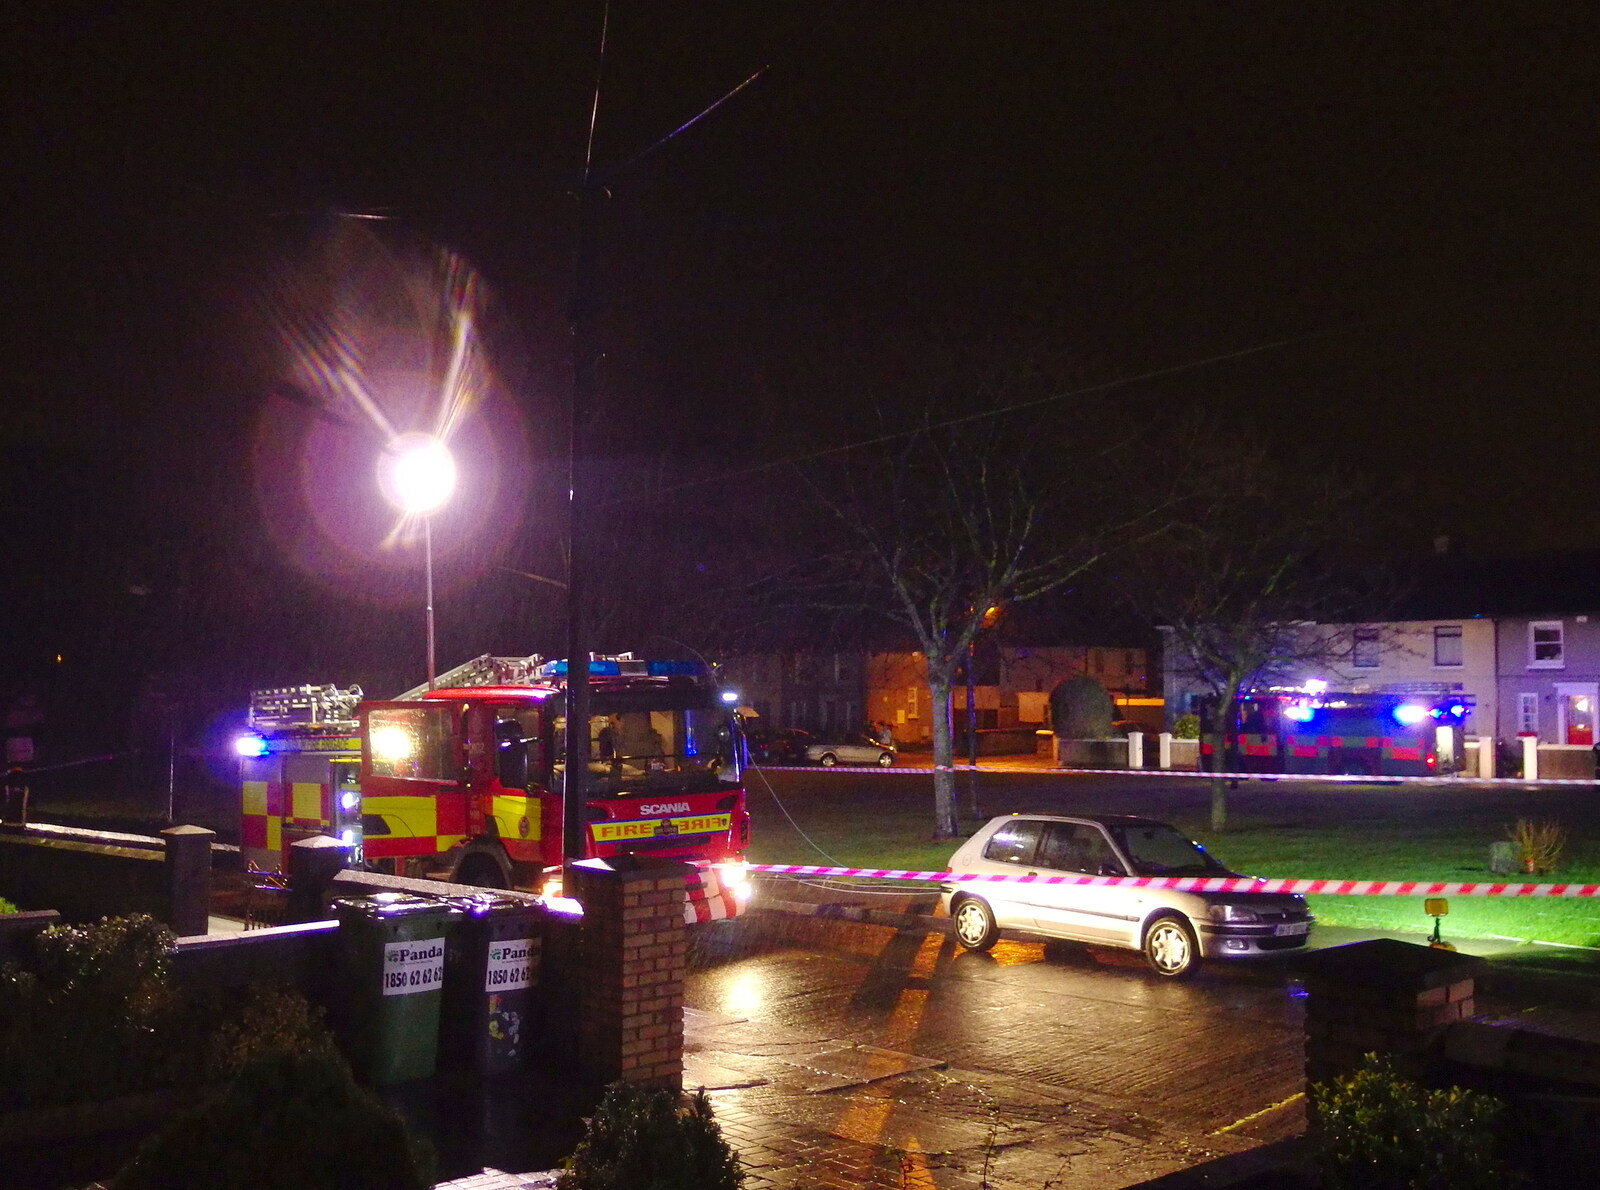 The fire service appears from Dun Laoghaire and an Electrical Disaster, Monkstown, County Dublin, Ireland - 4th January 2014